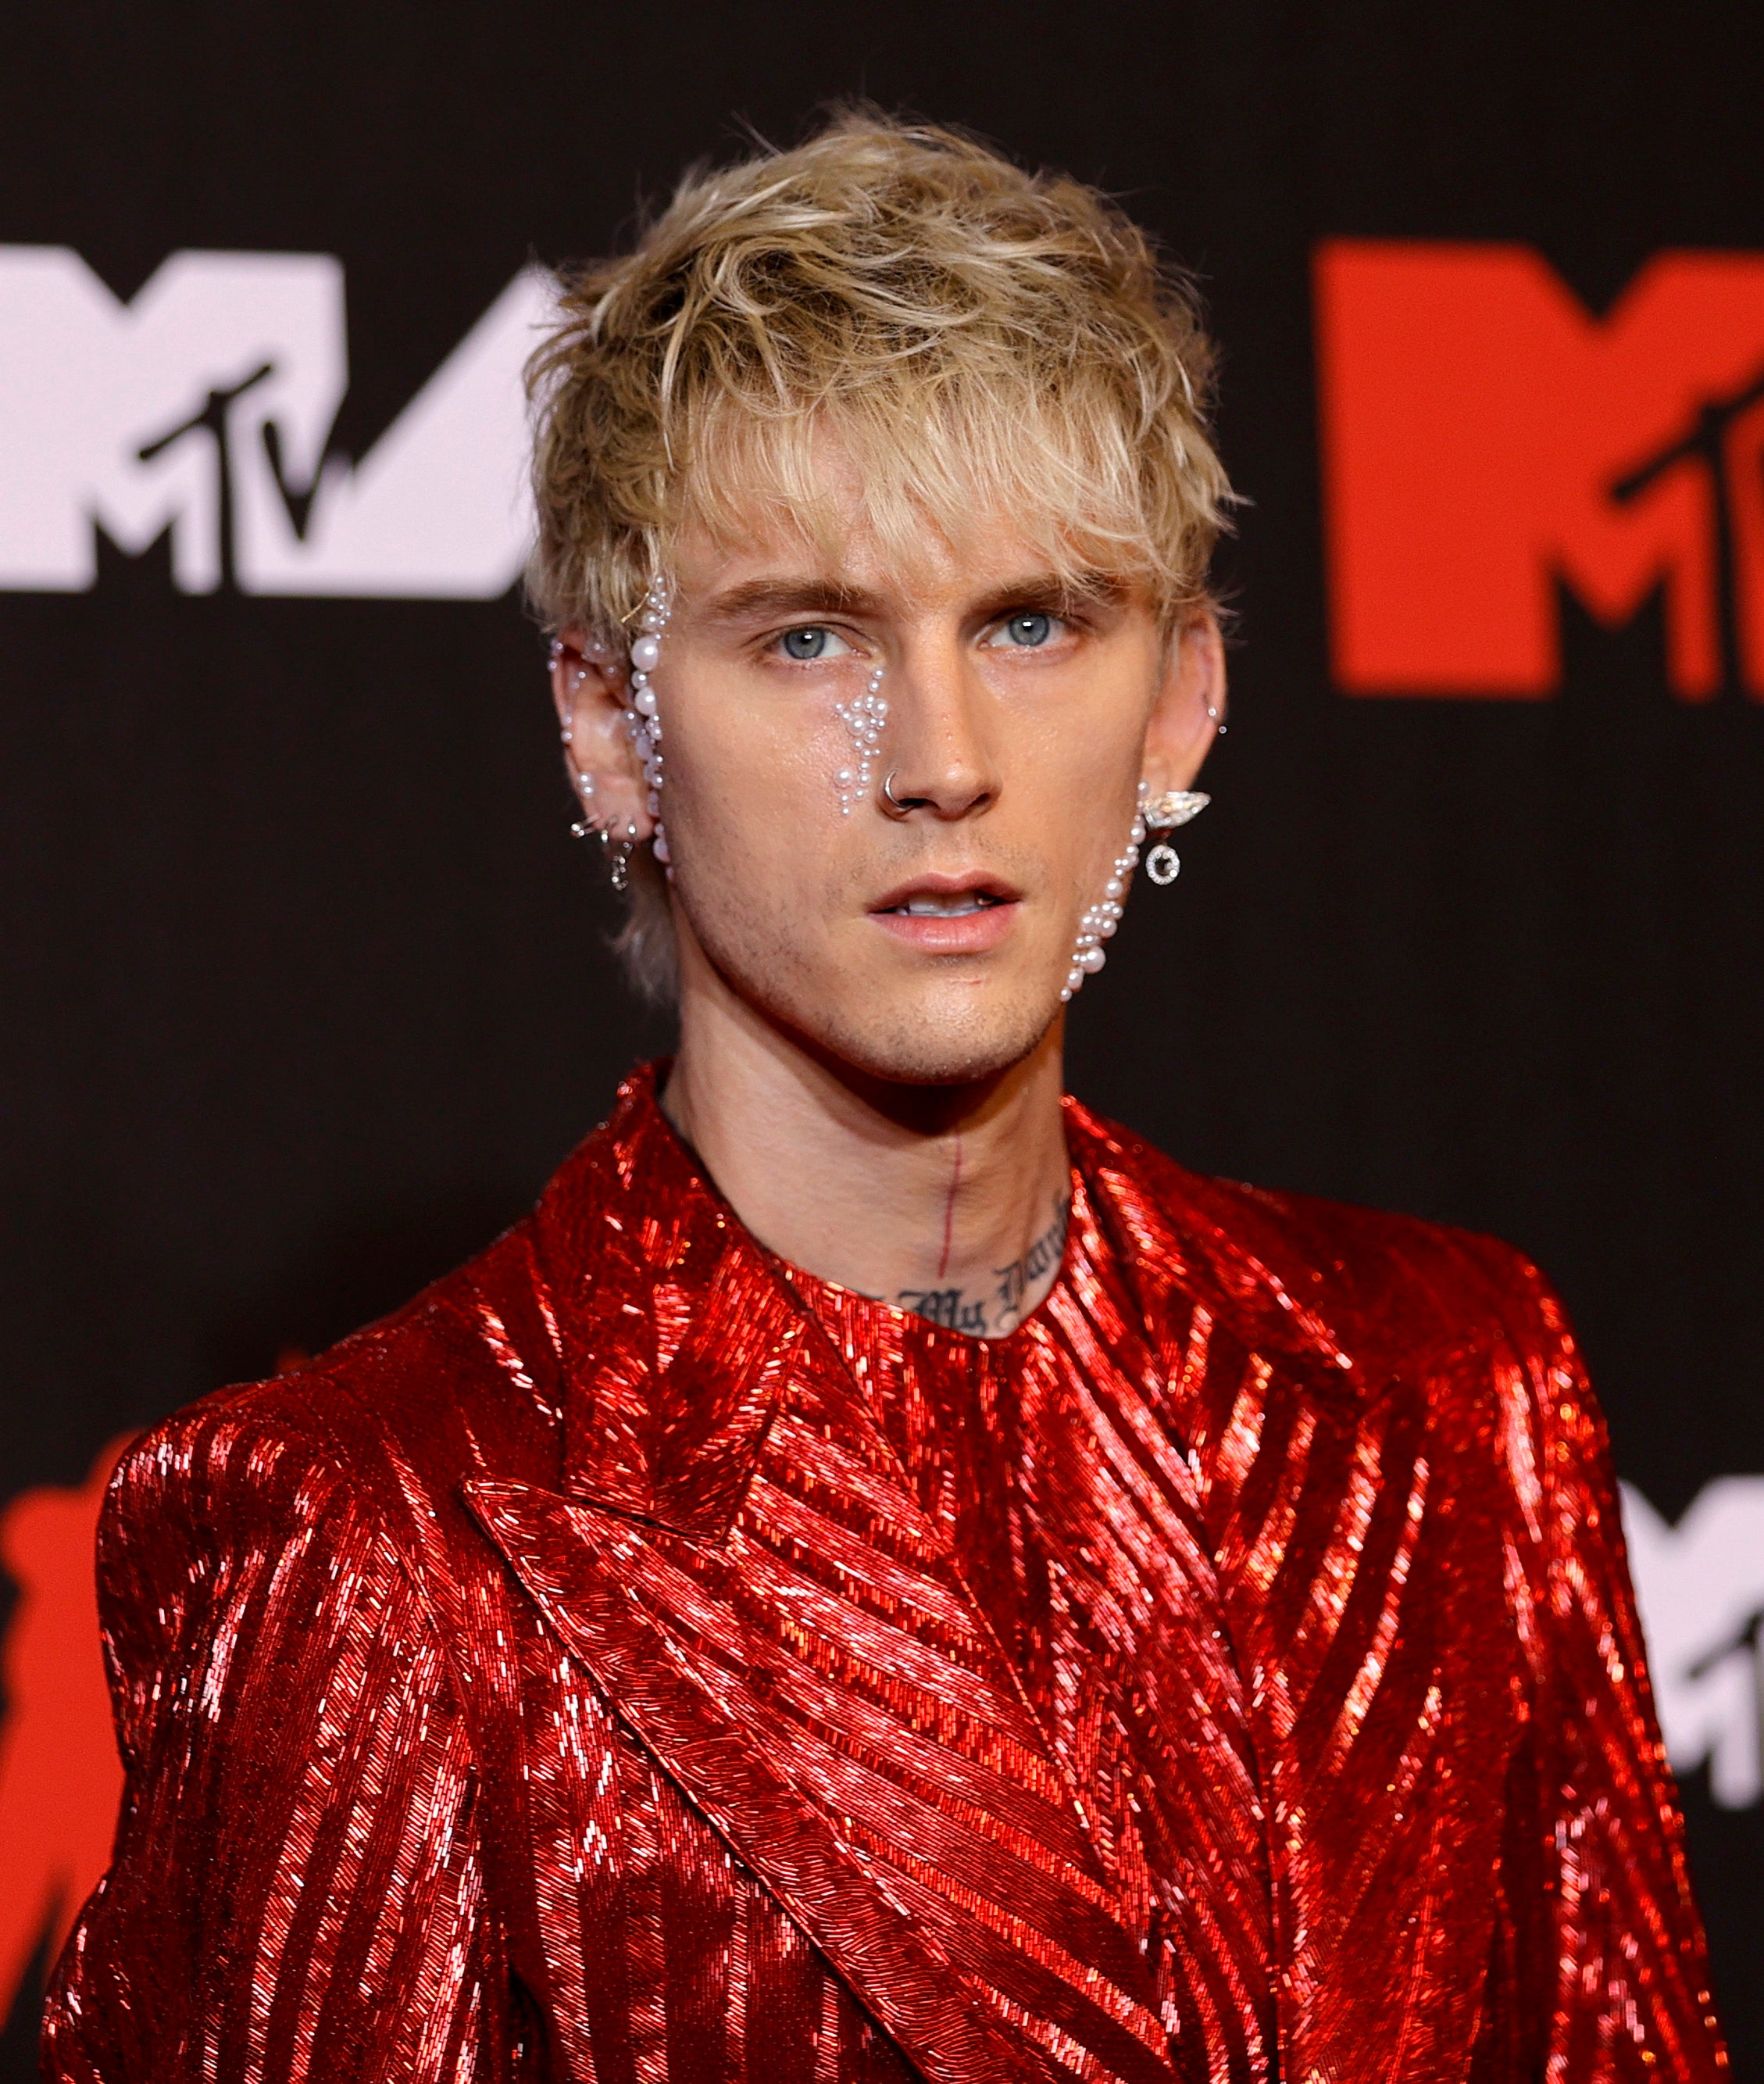 MGK in a shiny red jacket poses on the MTV event backdrop